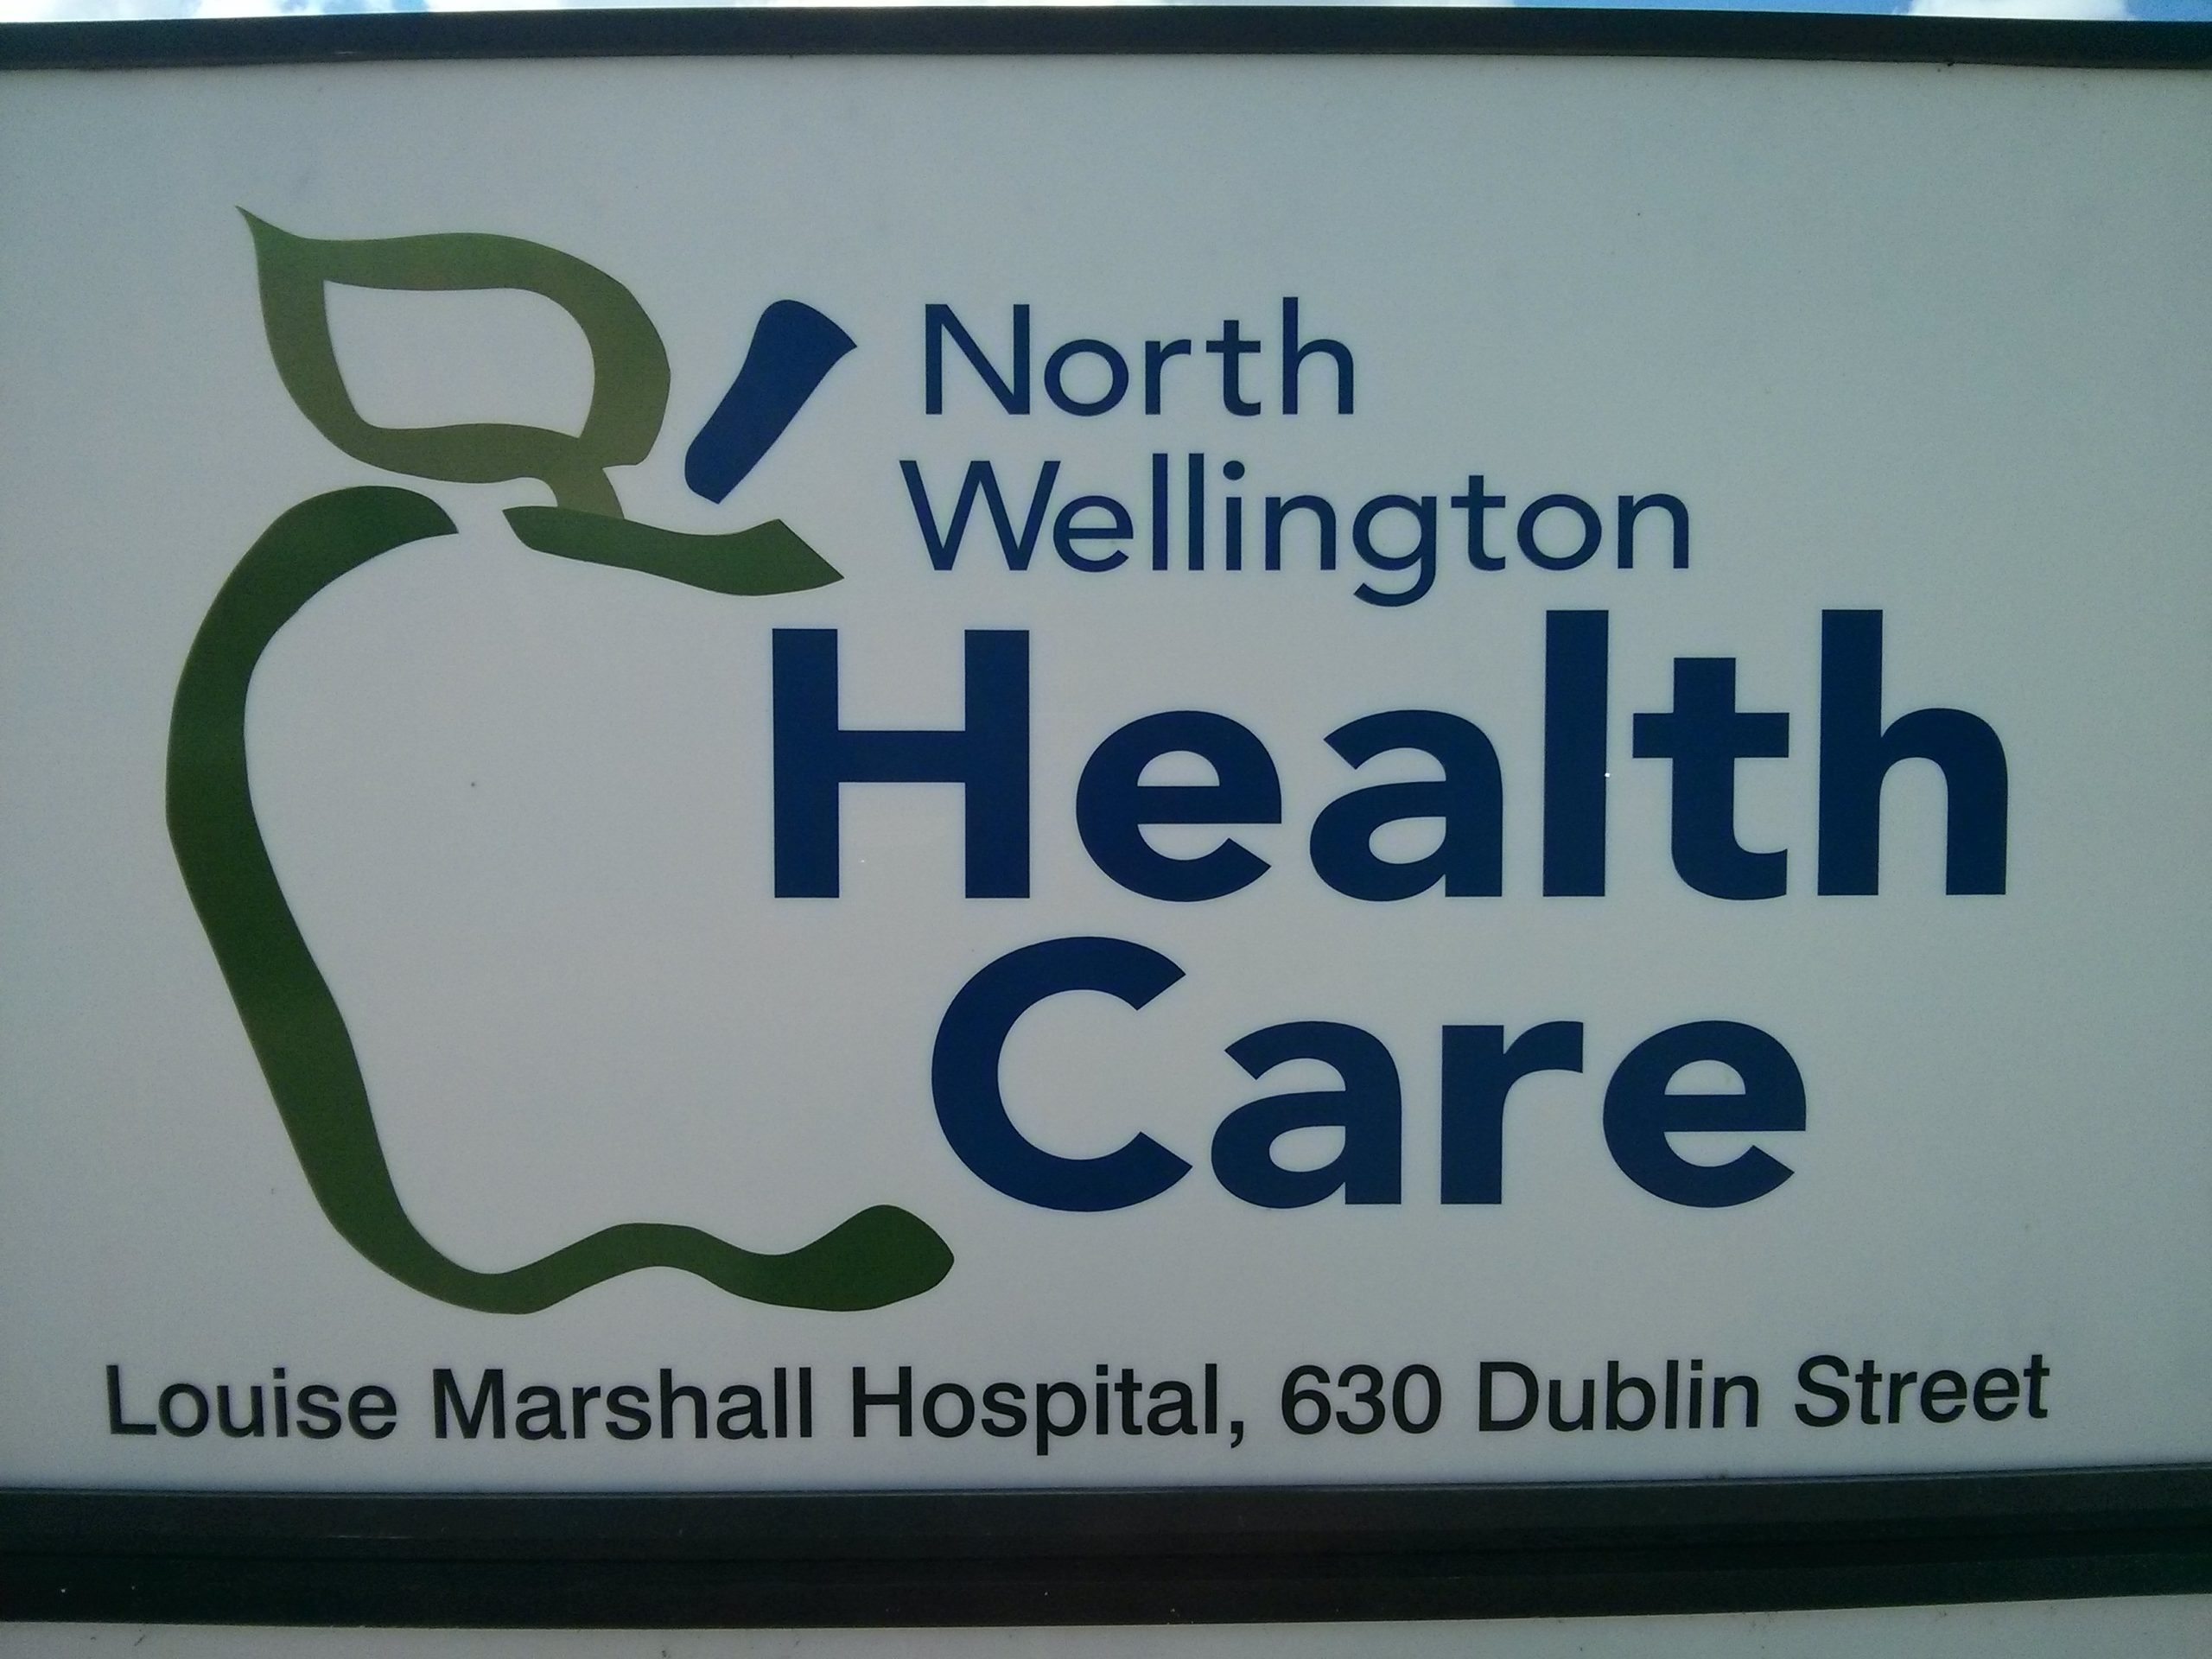 nursing shortage affects obstetrical services at north wellington health care scaled